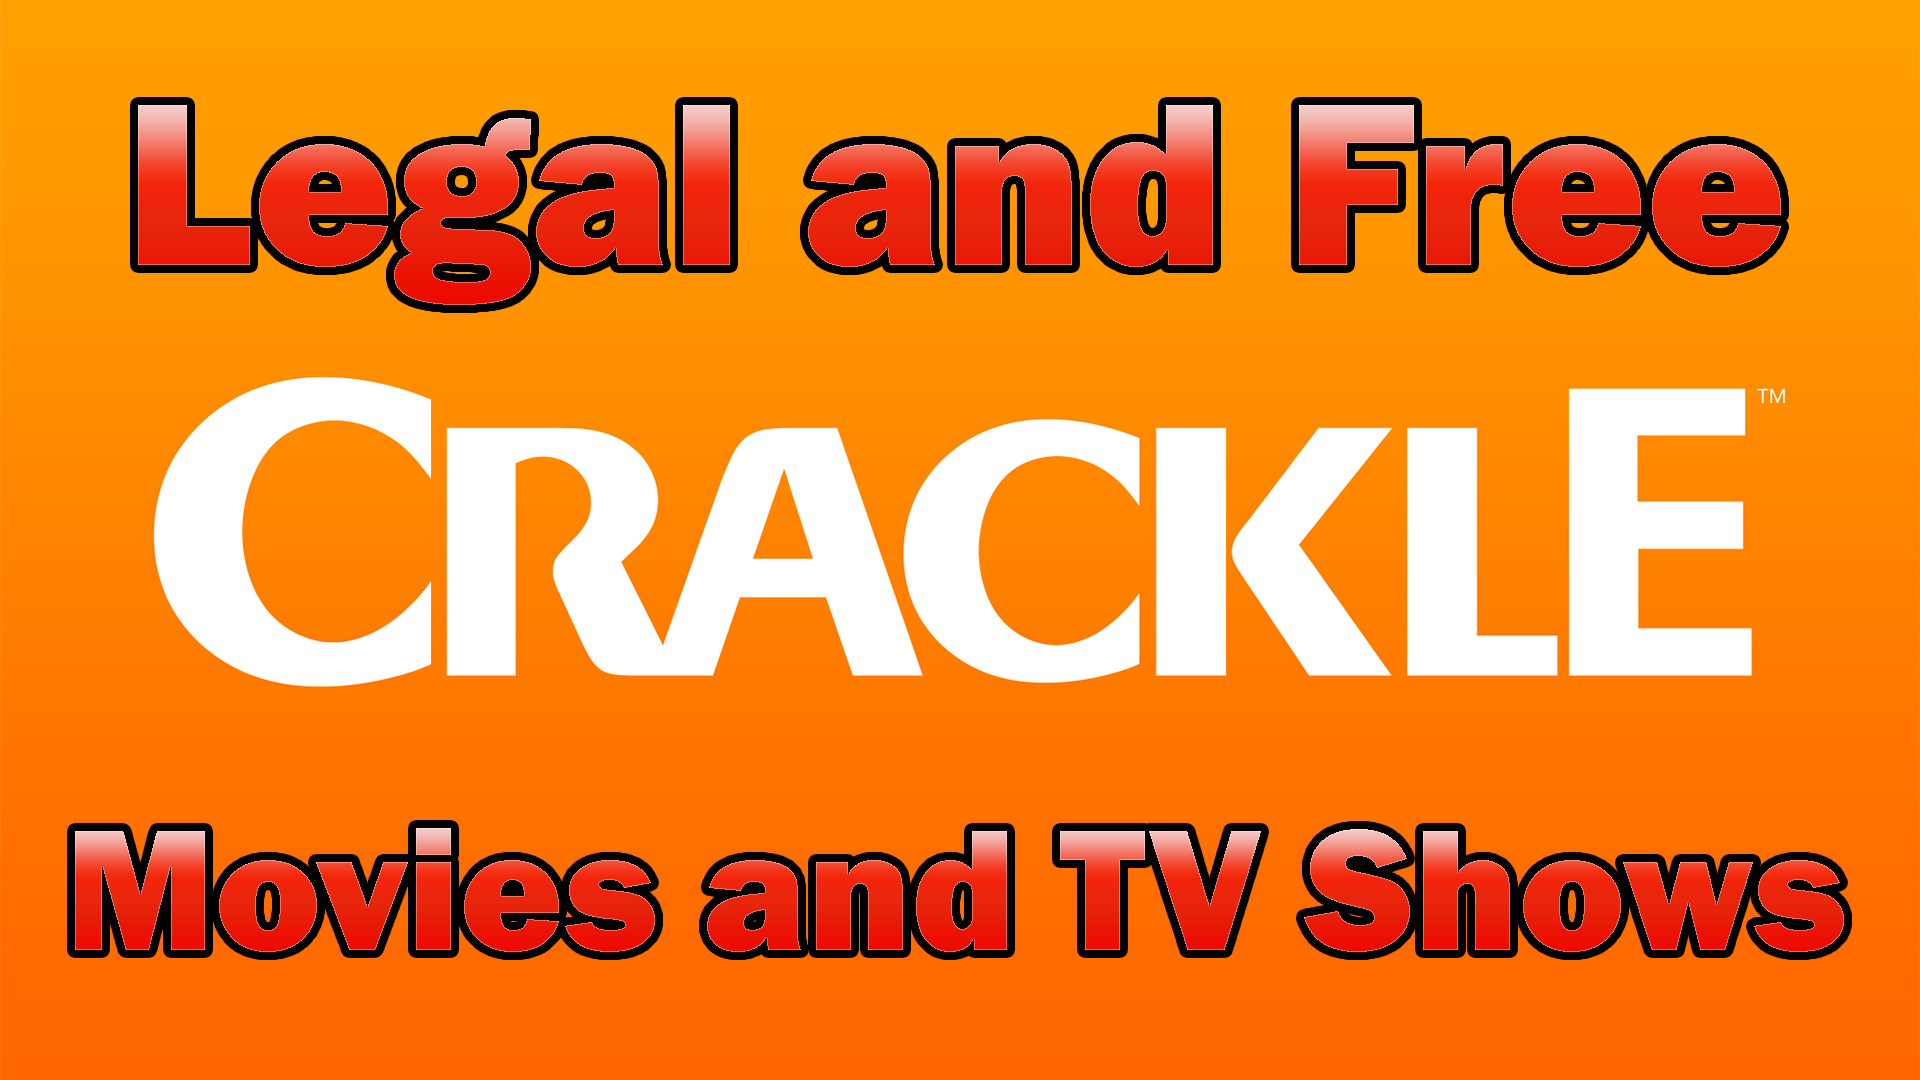 Sony Crackle Stream Free Movies TV Shows